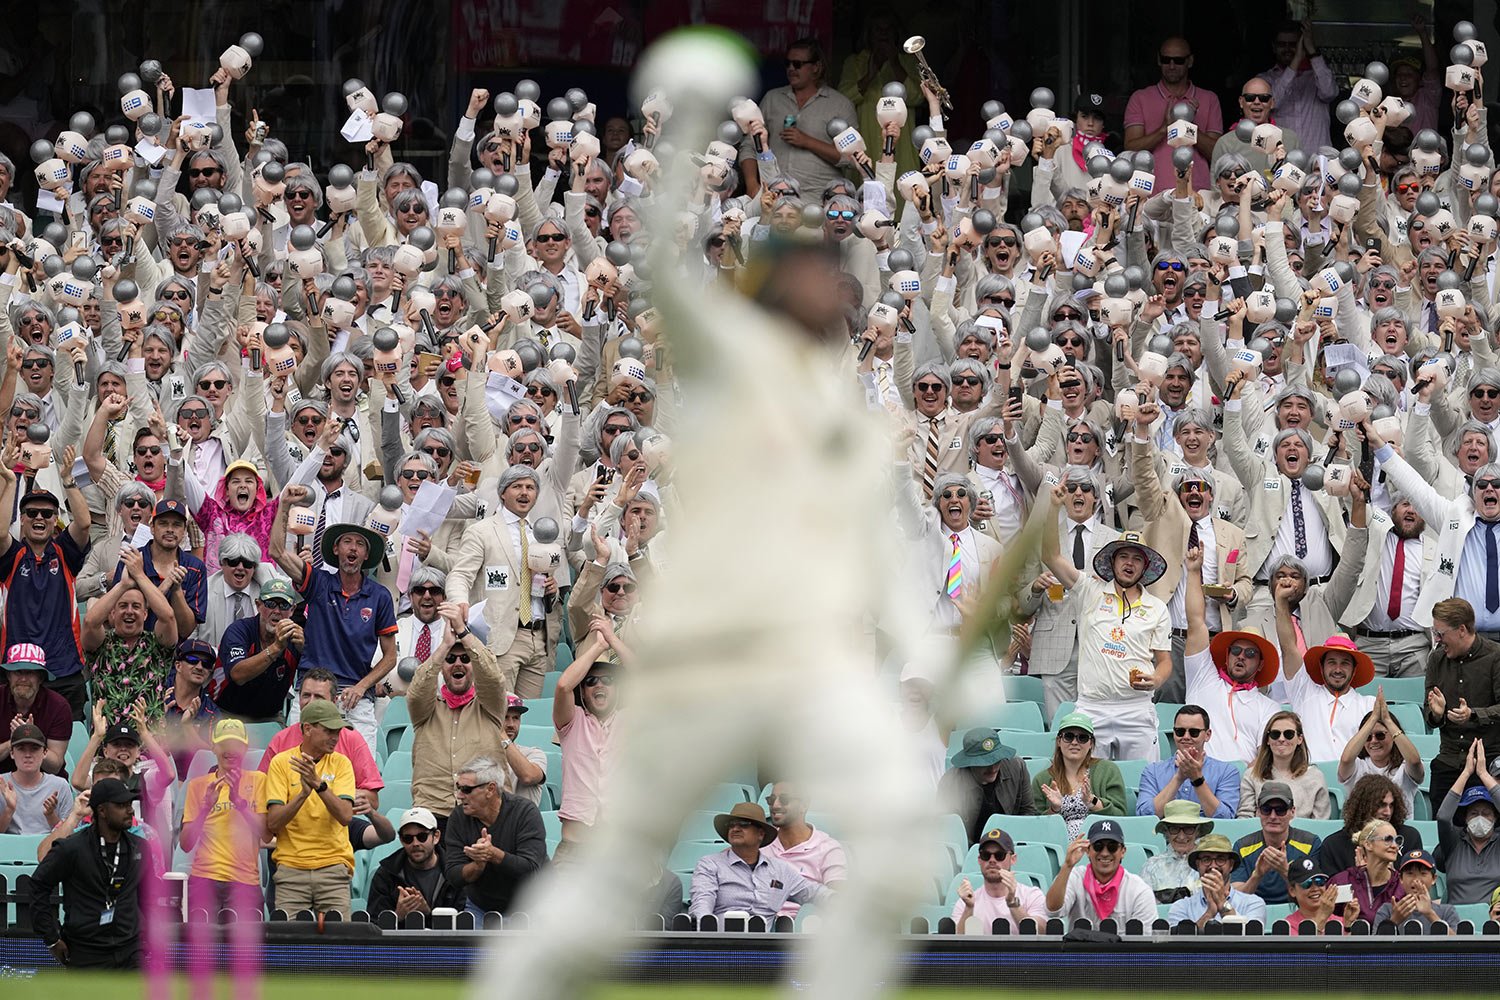  Fans known as "The Richies" cheer as Australia's Usman Khawaja celebrates with making 100 runs against South Africa during the second day of their cricket test match at the Sydney Cricket Ground in Sydney, Jan. 5, 2023. "The Richies" are an homage t